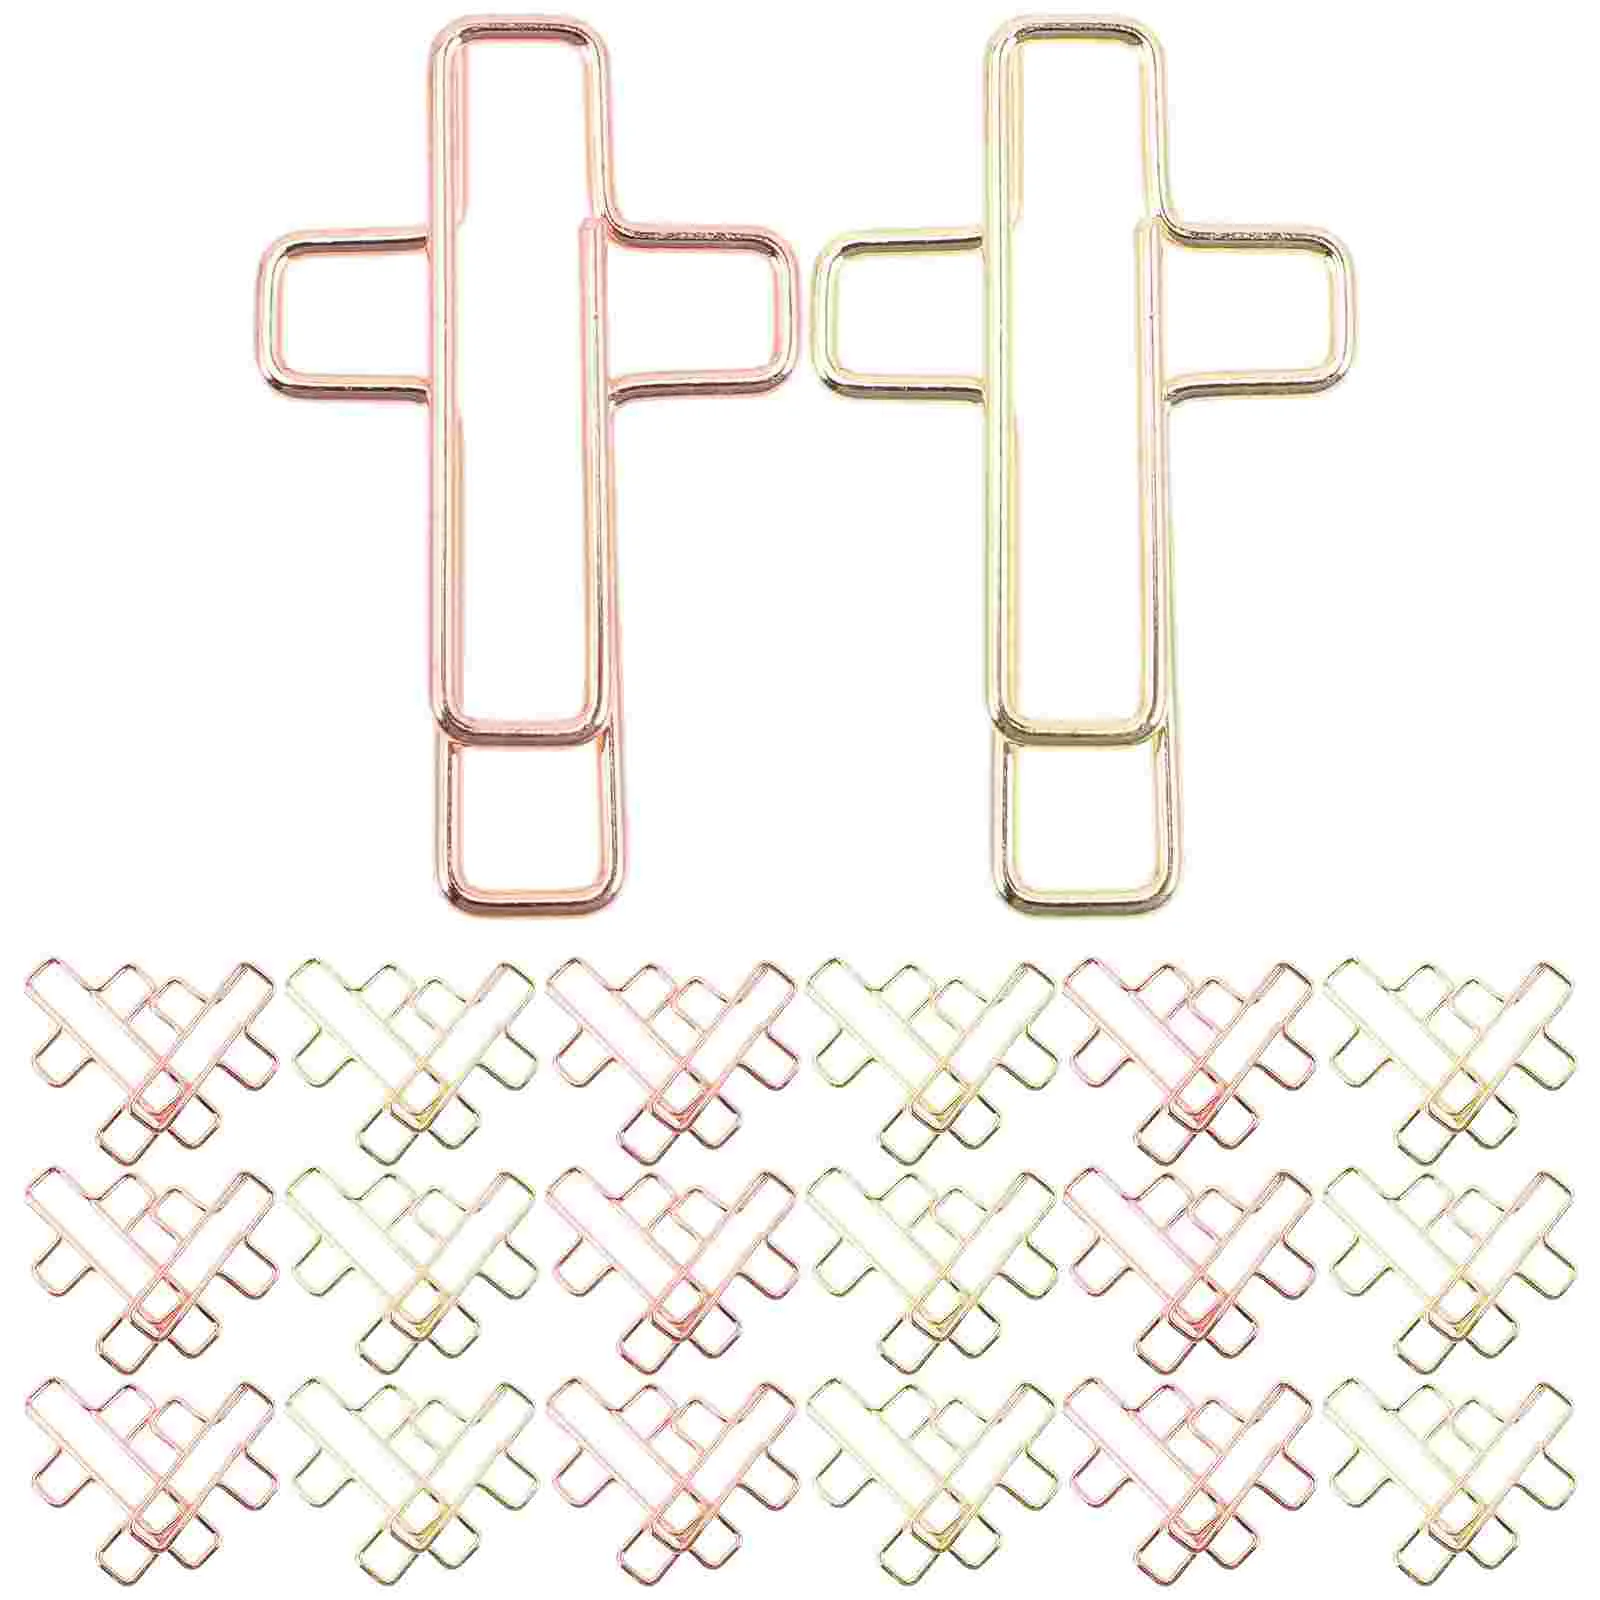 

Large Paper Clips Cross Shape Paper Clips 100Pcs Bible Bookmark Marking Clip File Organizer Decoration Journaling Paperclips